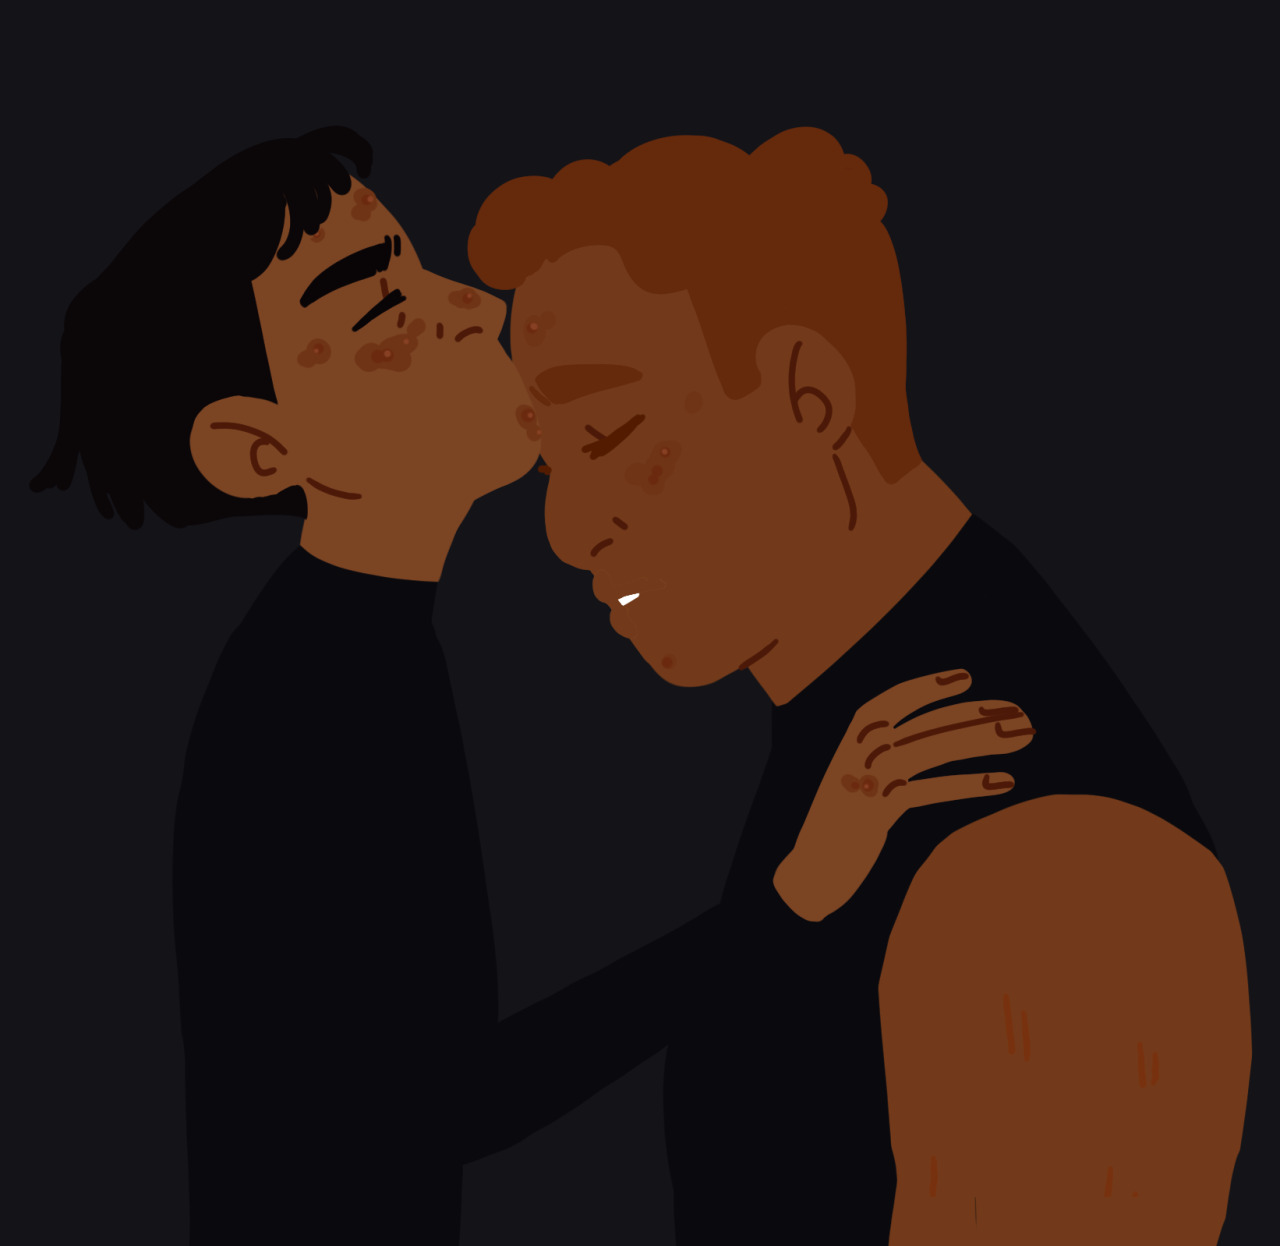 [ID: A lineless digital drawing of Harrowhark and Gideon from the Locked Tomb Series in a side view. Gideon is a buff teenager with brown skin and short dark red hair. Harrow is a skinny teenager with washed-out light brown skin and black cropped hair. They both have acne and are wearing all black. Gideon has her head lowered and Harrow is leaning up to kiss her on the forhead. Her hands rest in Gideon’s shoulders. End ID.]First flower of my house… #griddlehark#gideon nav#harrowhark nonagesimus #gideon the ninth  #harrow the ninth  #the locked tomb #tlt#gtn#htn